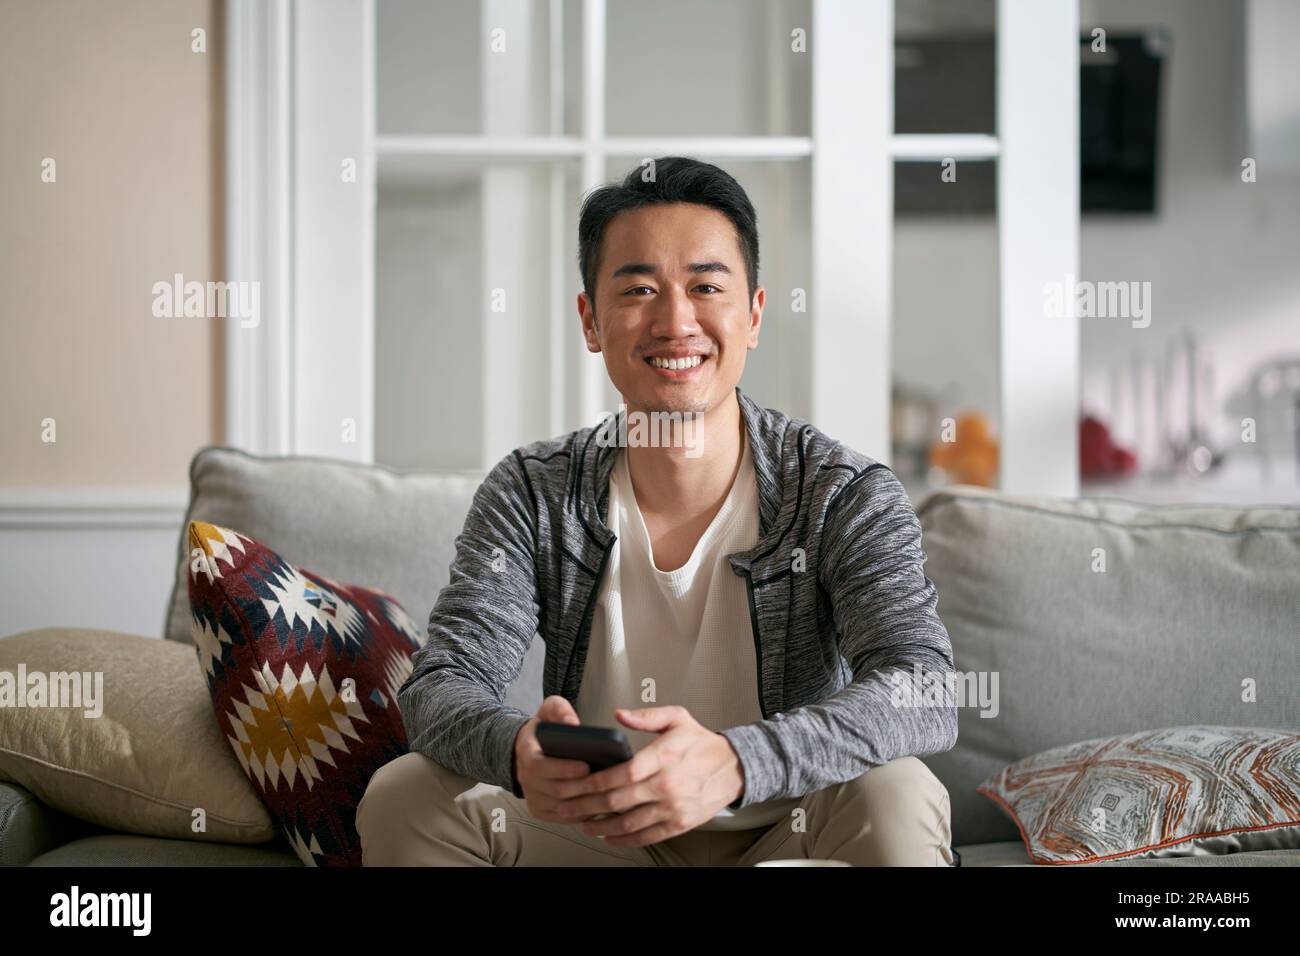 home portrait of a young happy asian man sitting on family couch looking at camera smiling Stock Photo